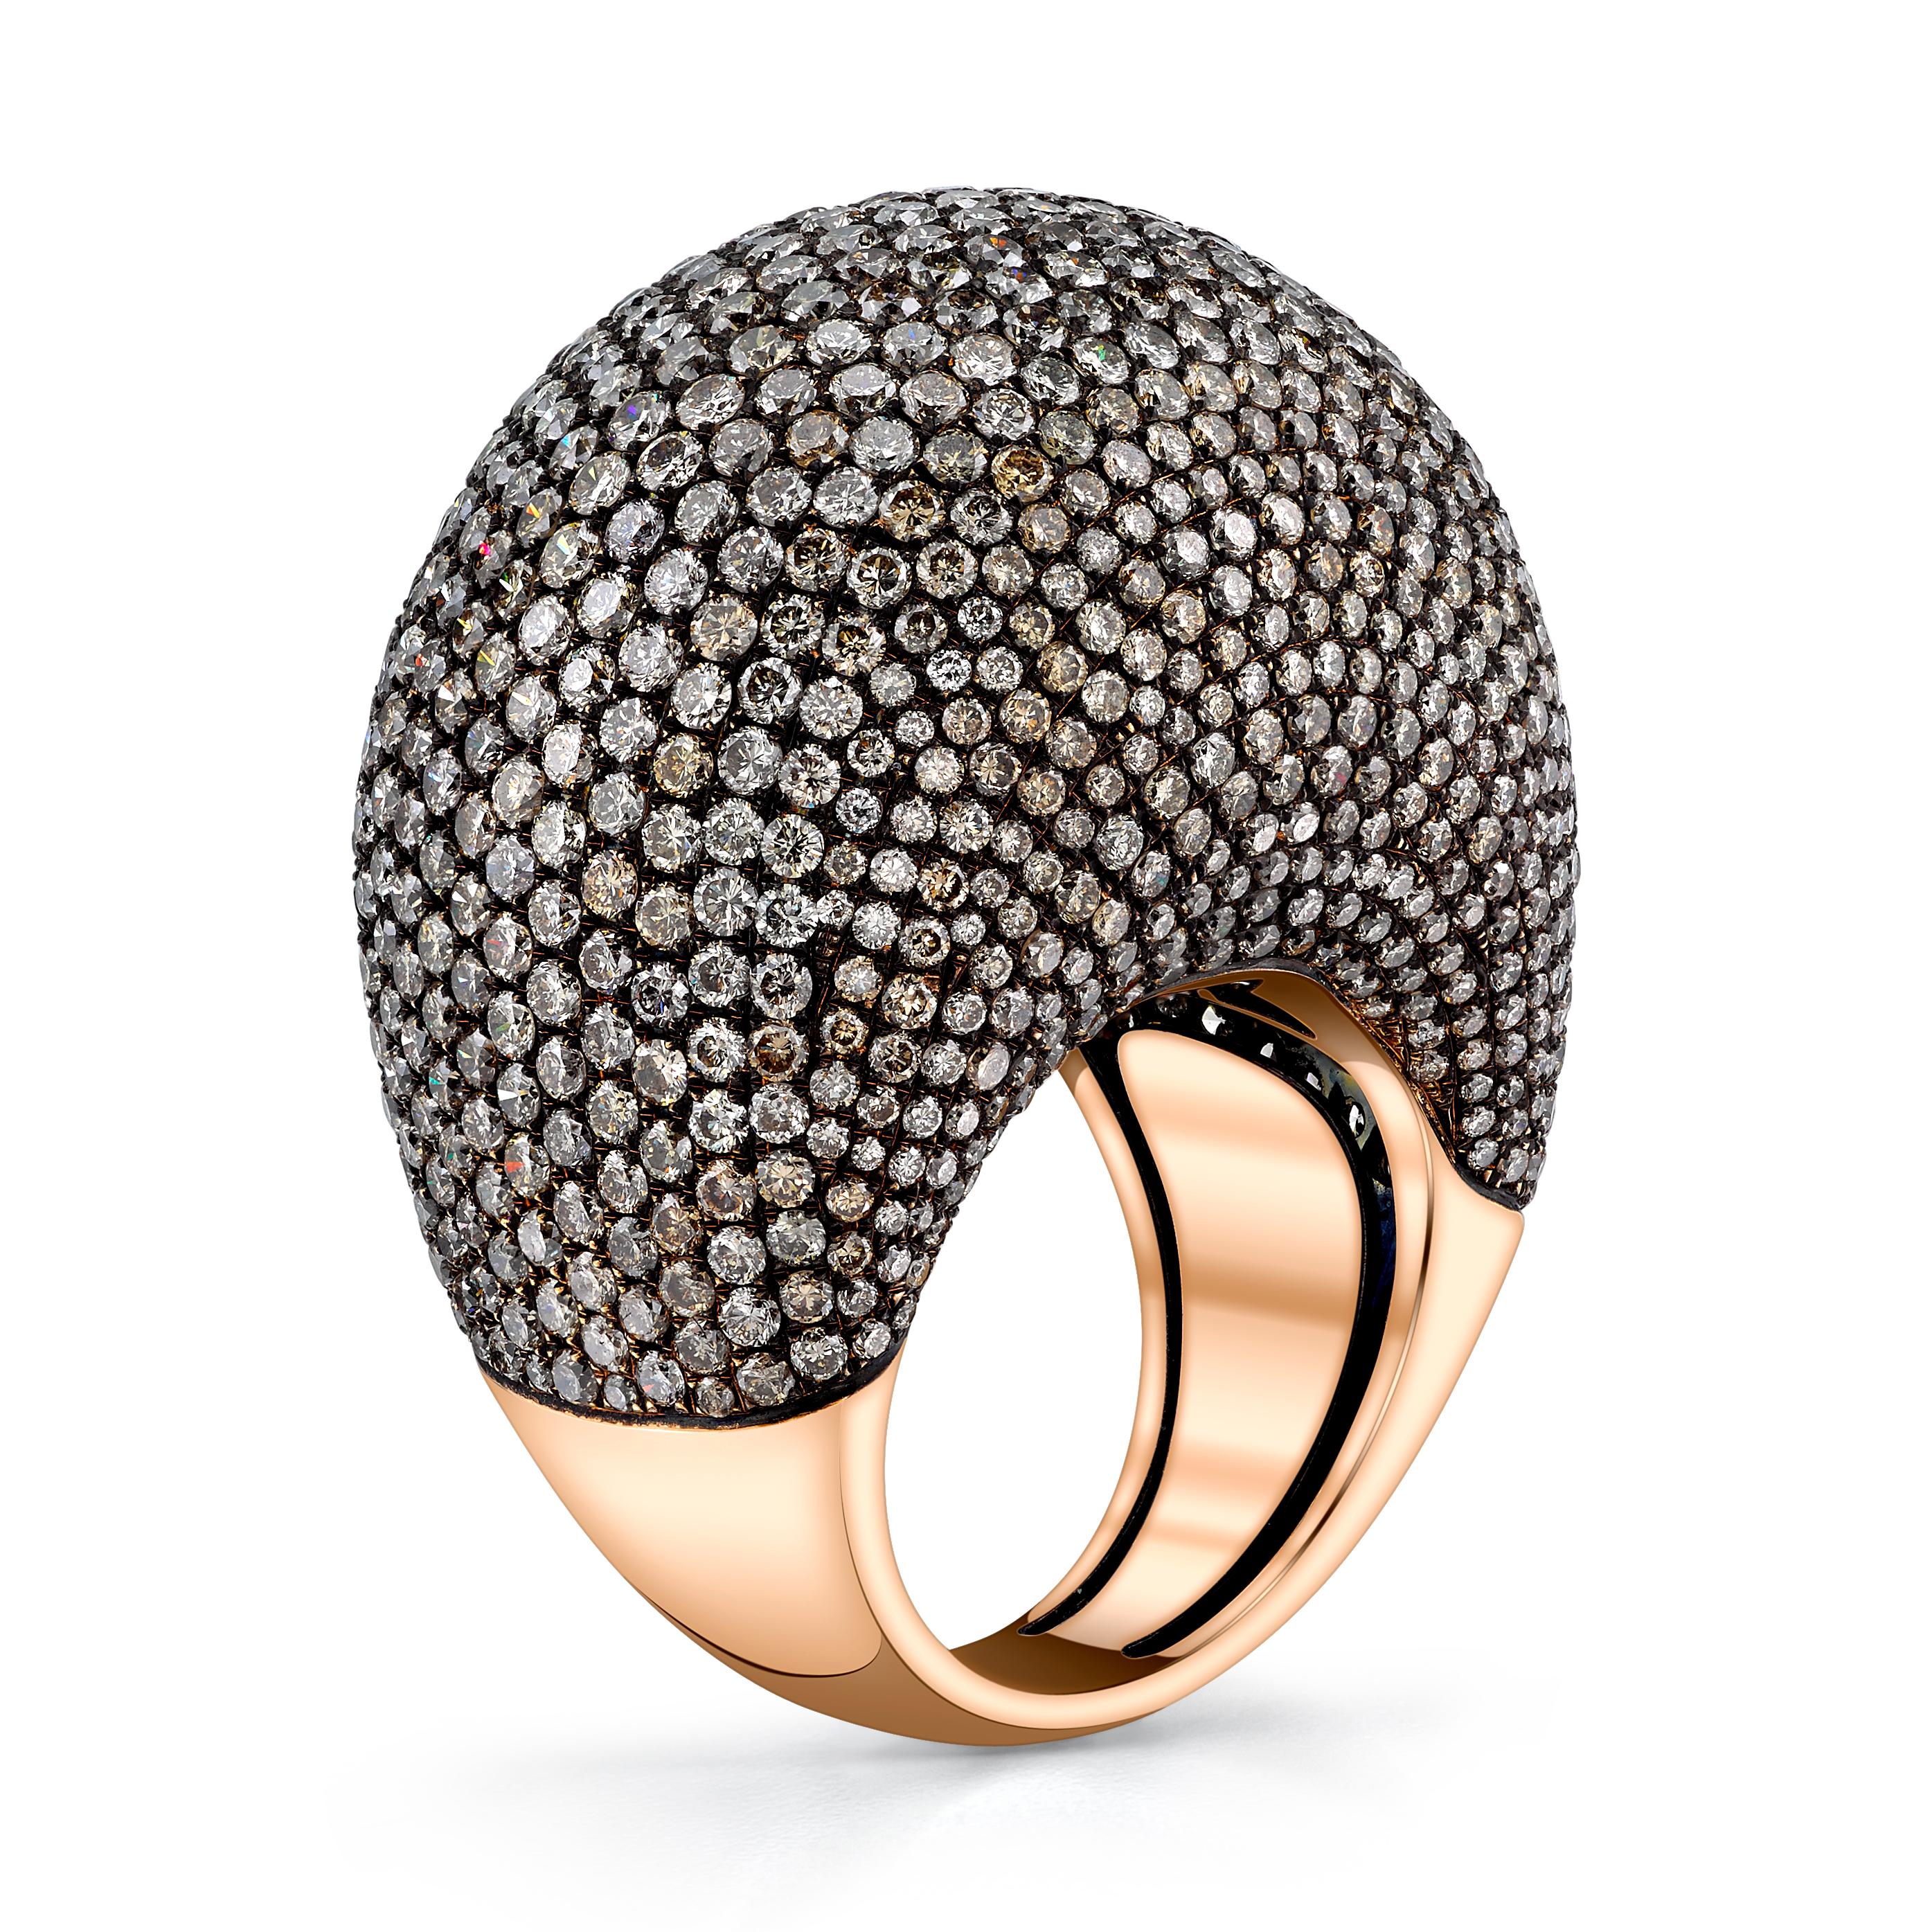 Wow! This ring is a statement of sparkle! Set with natural color, chocolate brown, round brilliant cut diamonds, this classic 